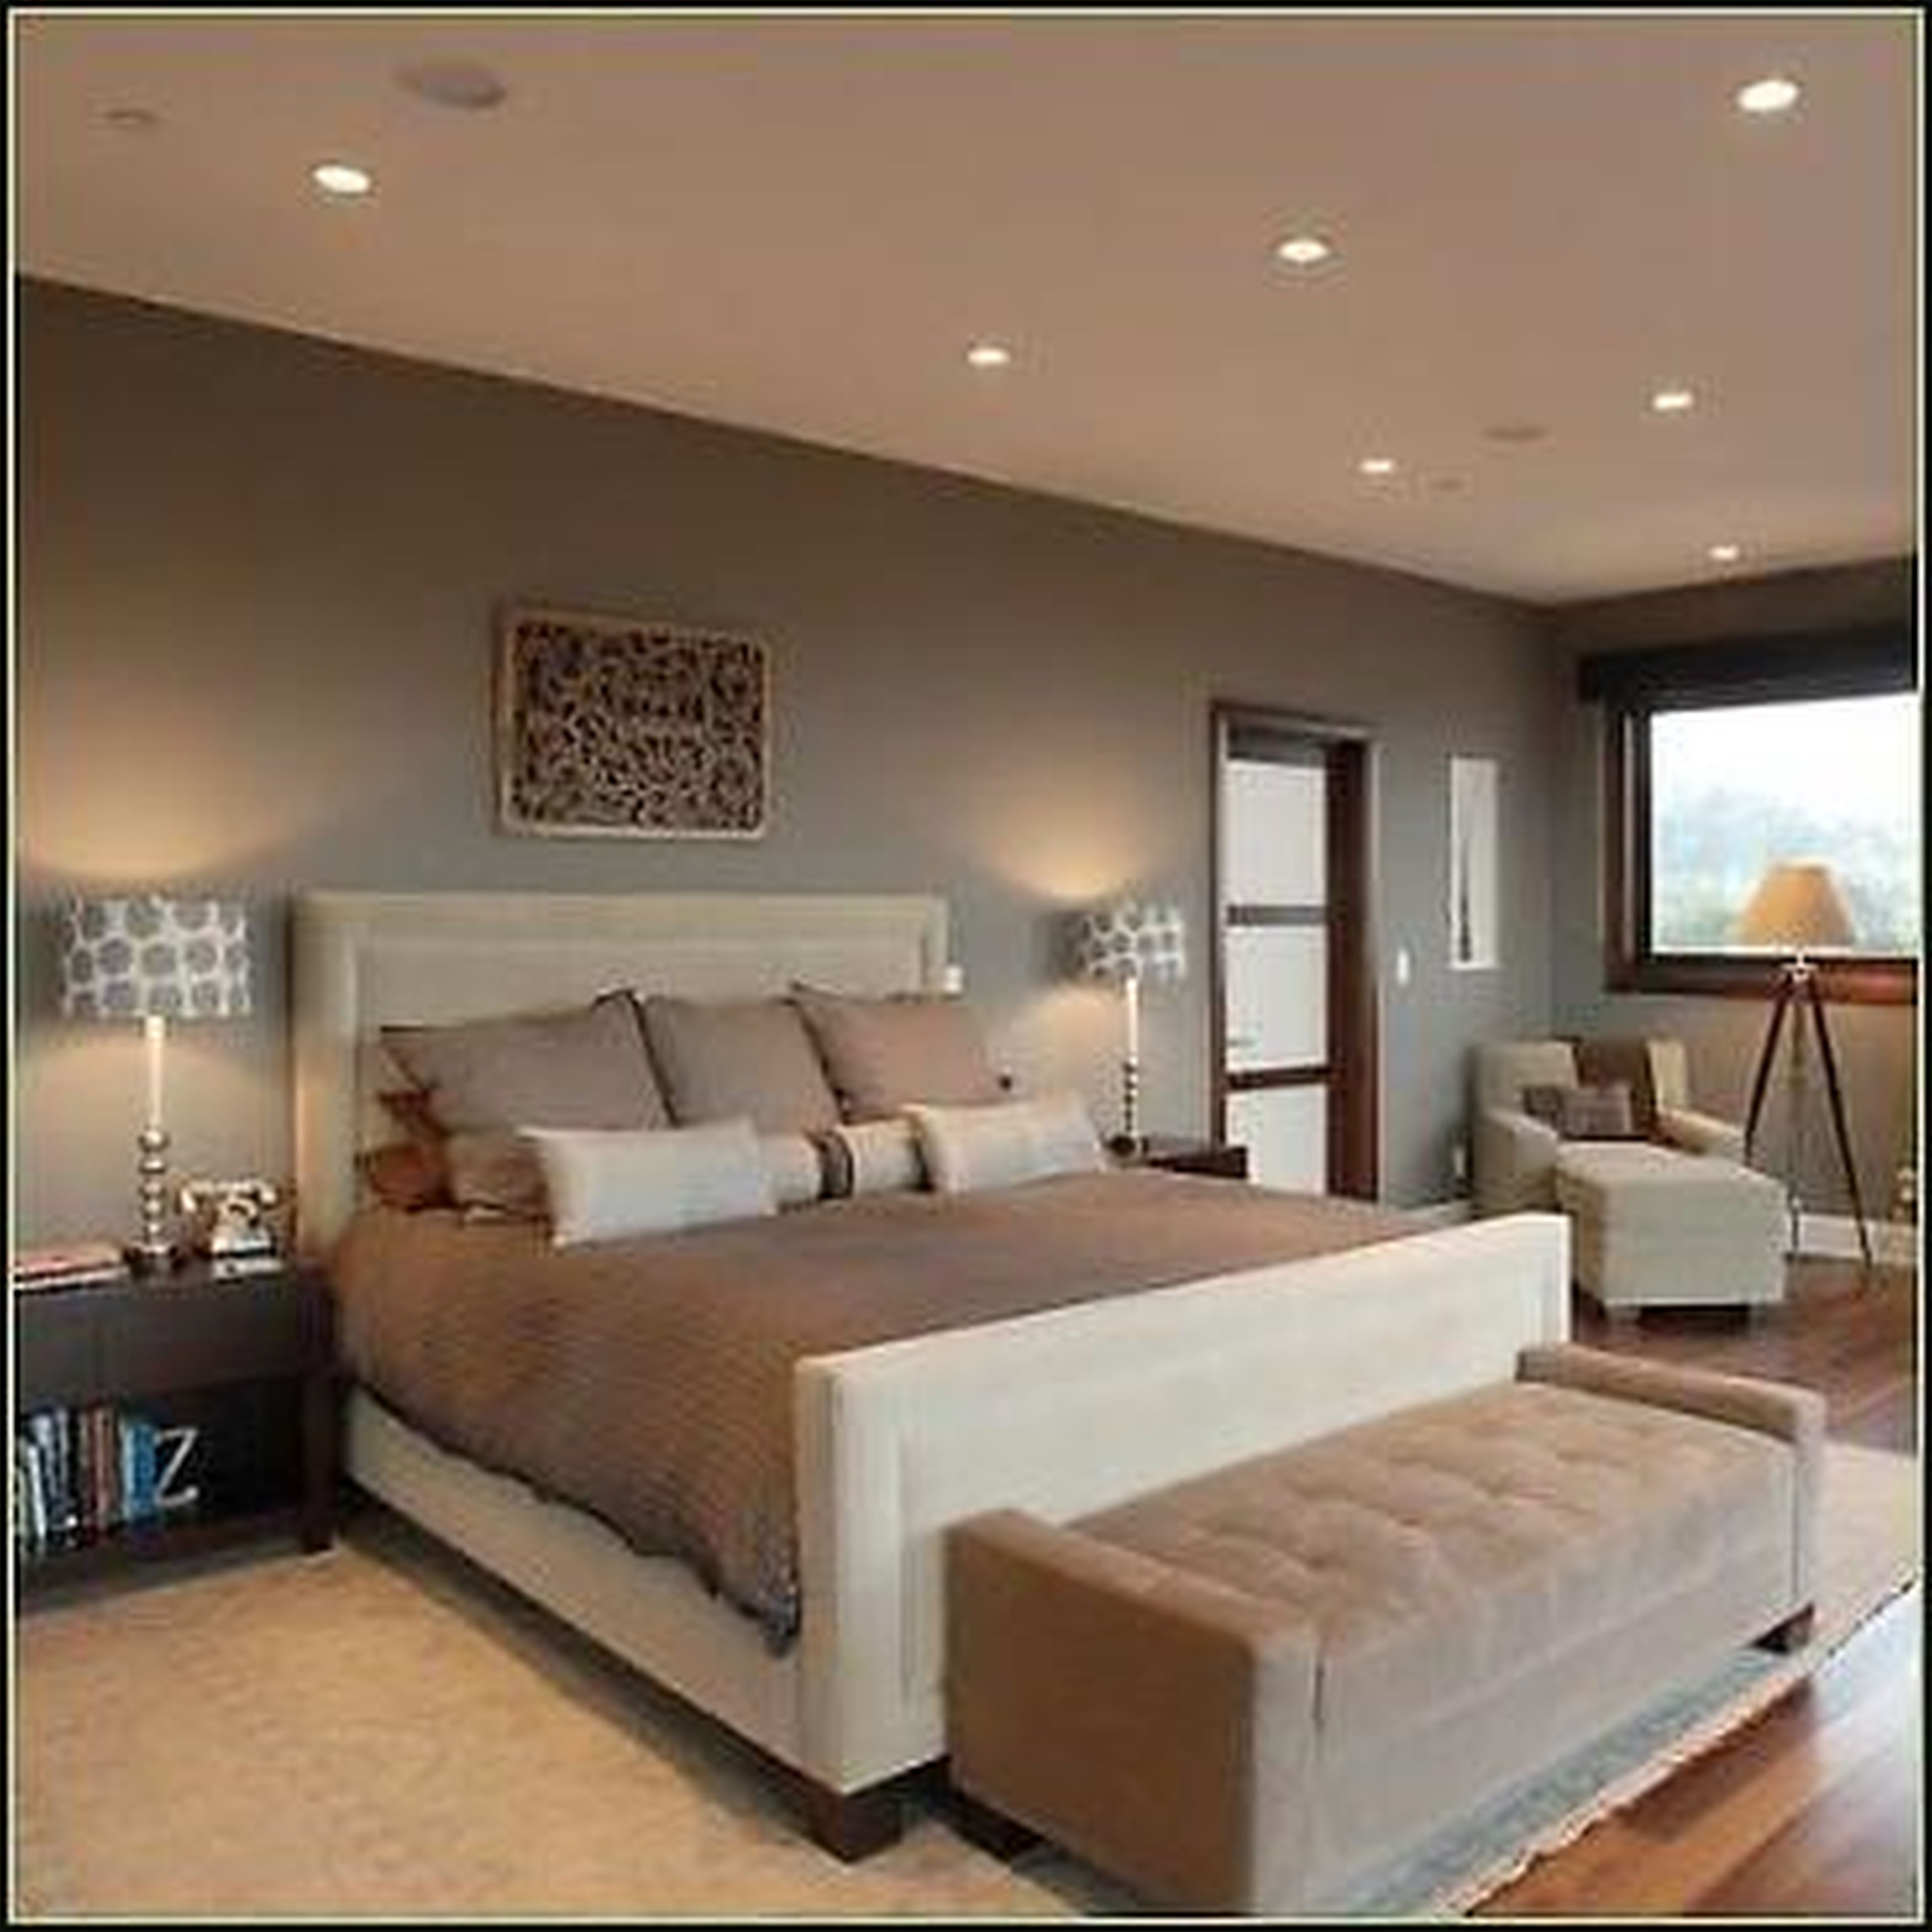 10 Unique Master Bedroom Wall Color Ideas wall paint color schemes bedroom ideas wall color bedroom paint 2024